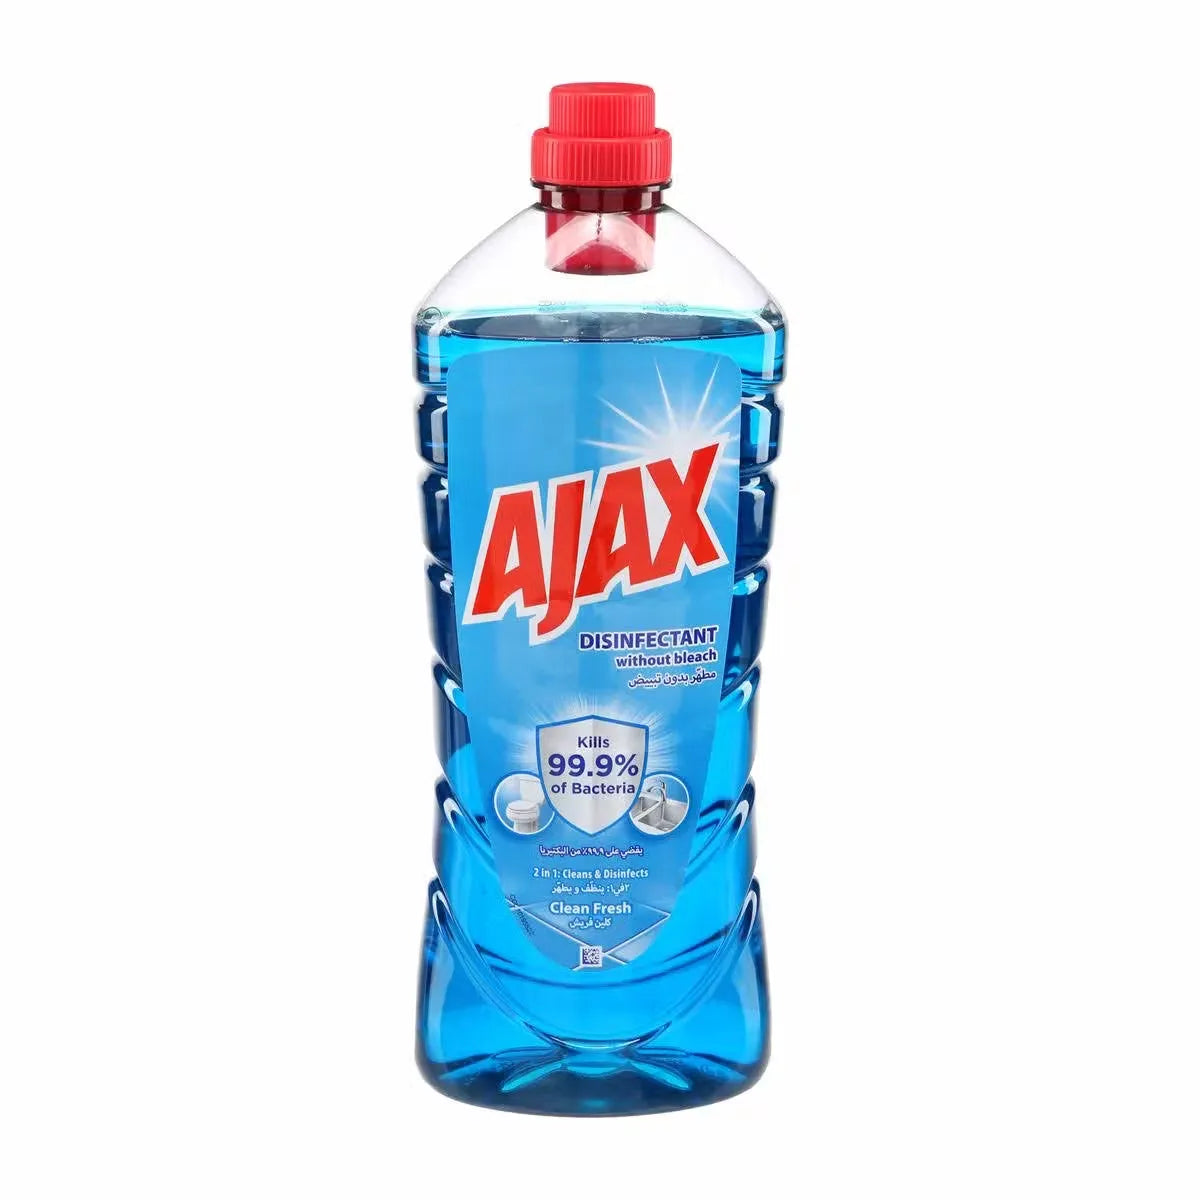 Blue bottle of Ajax Clean Fresh 2in1 Clean & Disinfect with trigger and easy-grip handle. Close-up view of product label highlighting "cleans & disinfects without bleach."